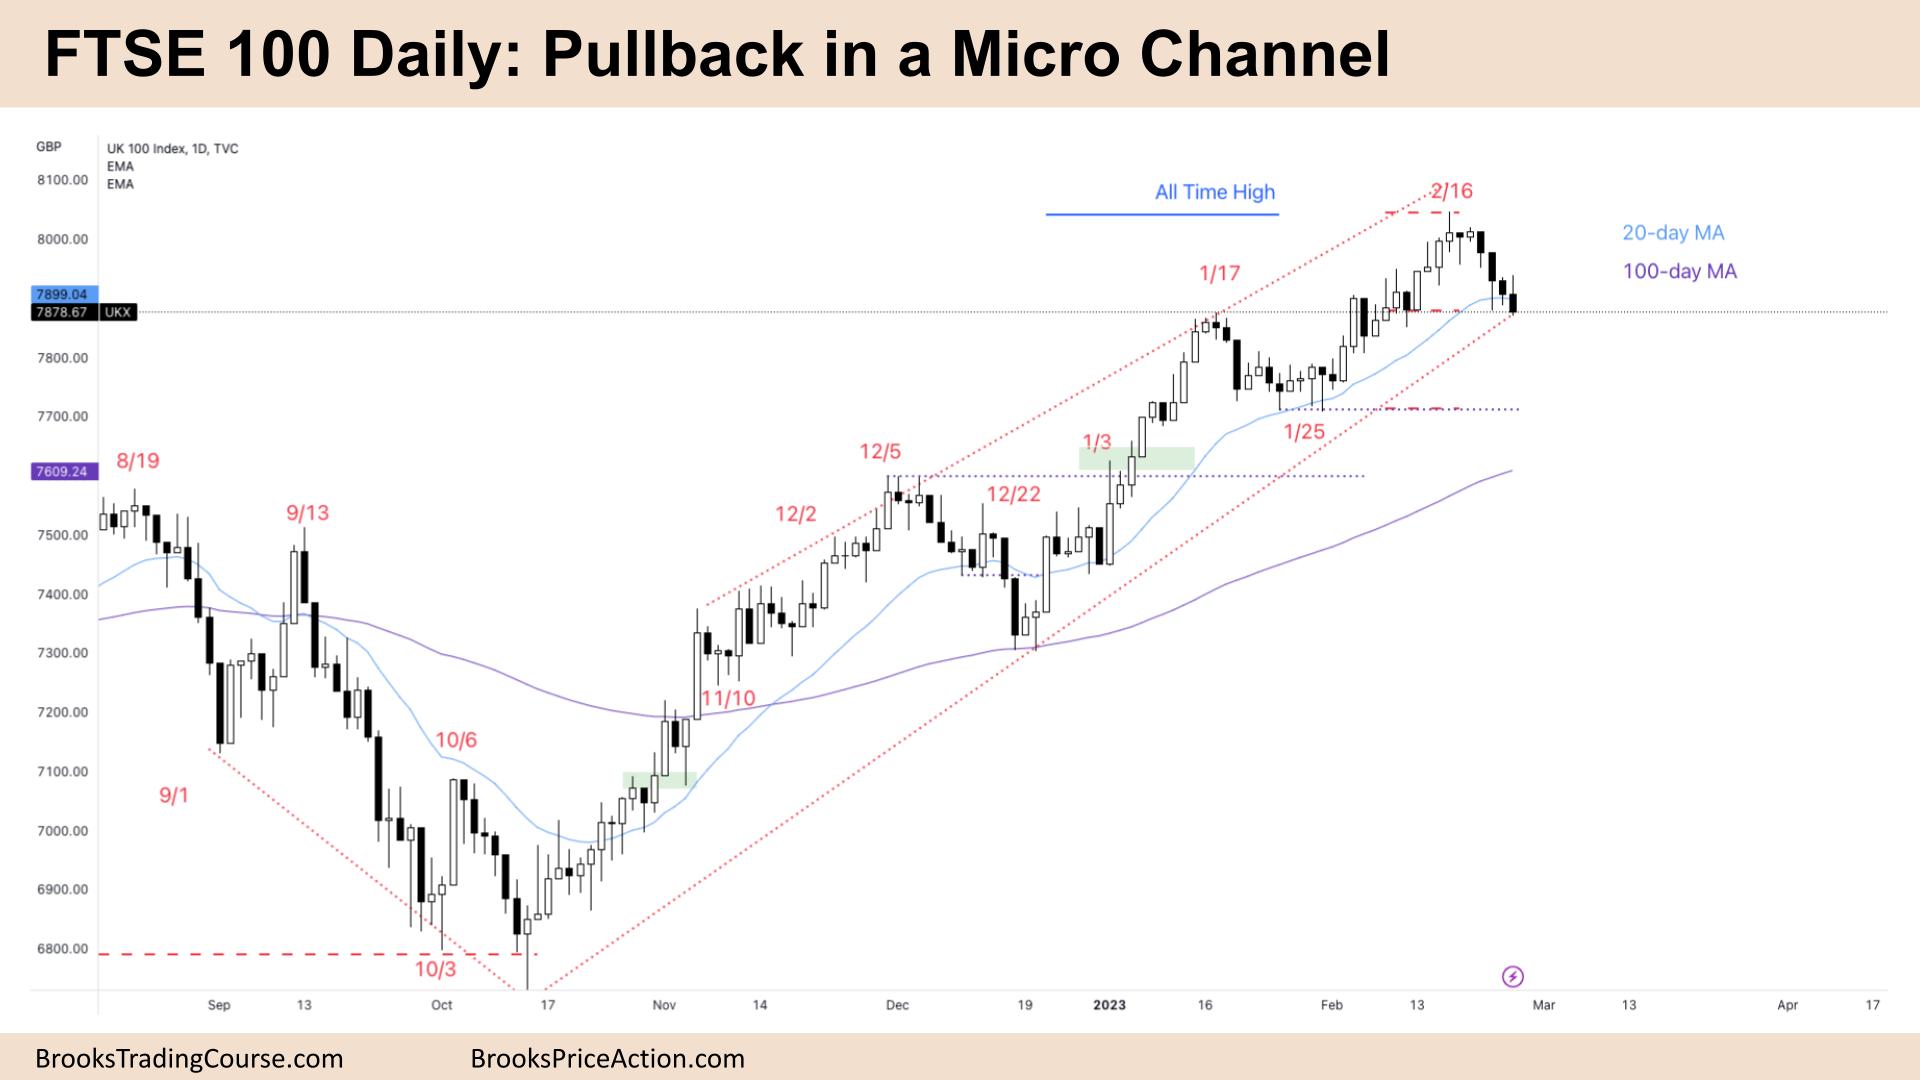 FTSE 100 Pullback in a Micro Channel